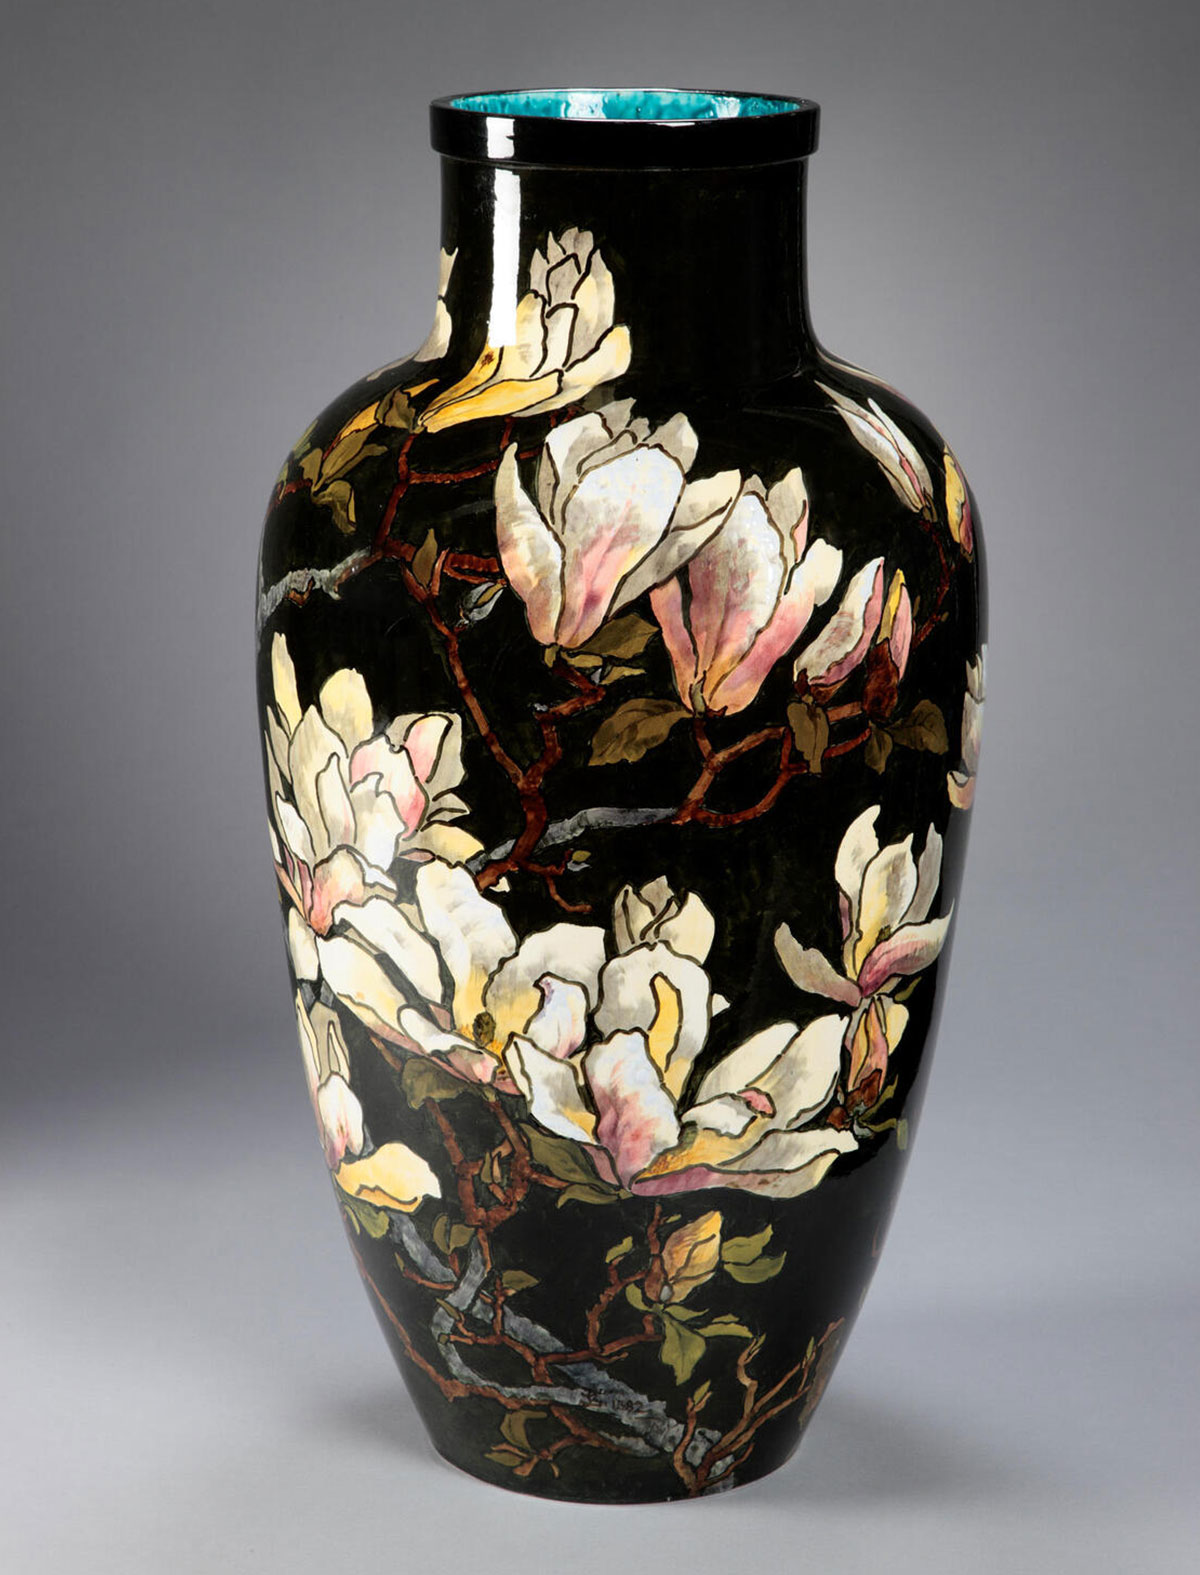 A tall ceramic vase with pale white and pink flowers painted onto a dark surface. The inner rim of the vase, barely visible at the top, is a bright turquoise